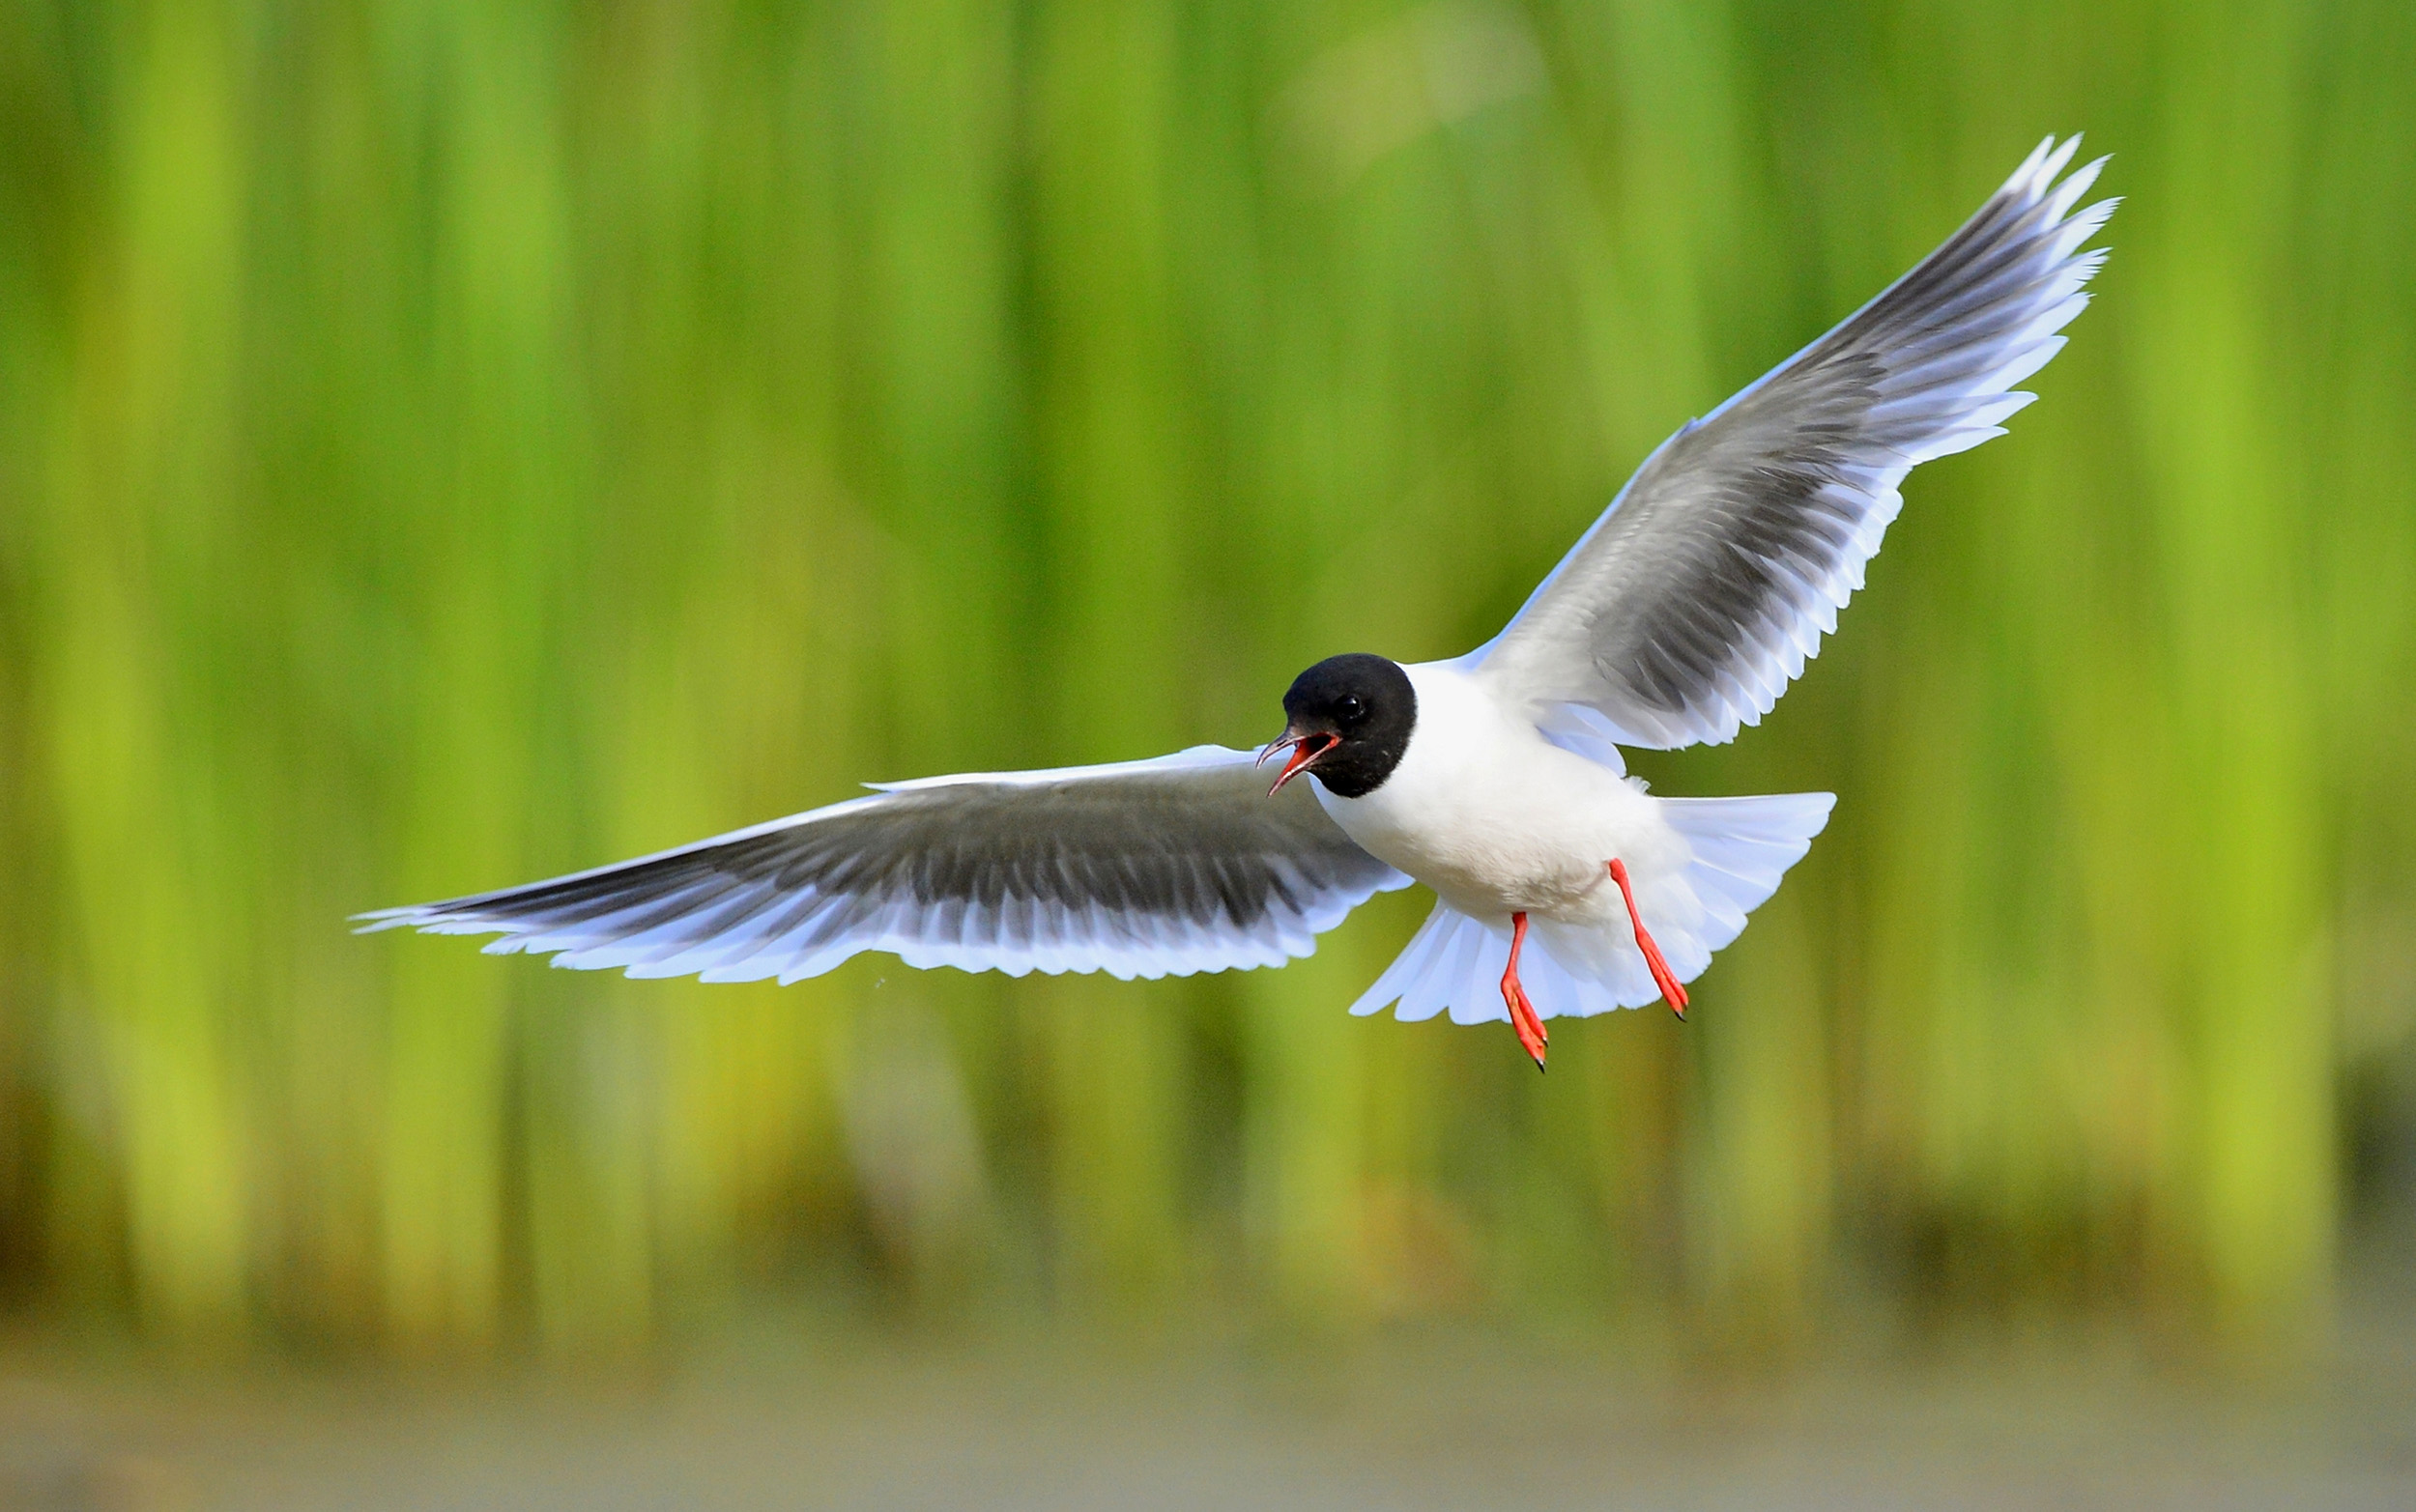 A Little Gull in summer plumage in mid flight with a green grass background.